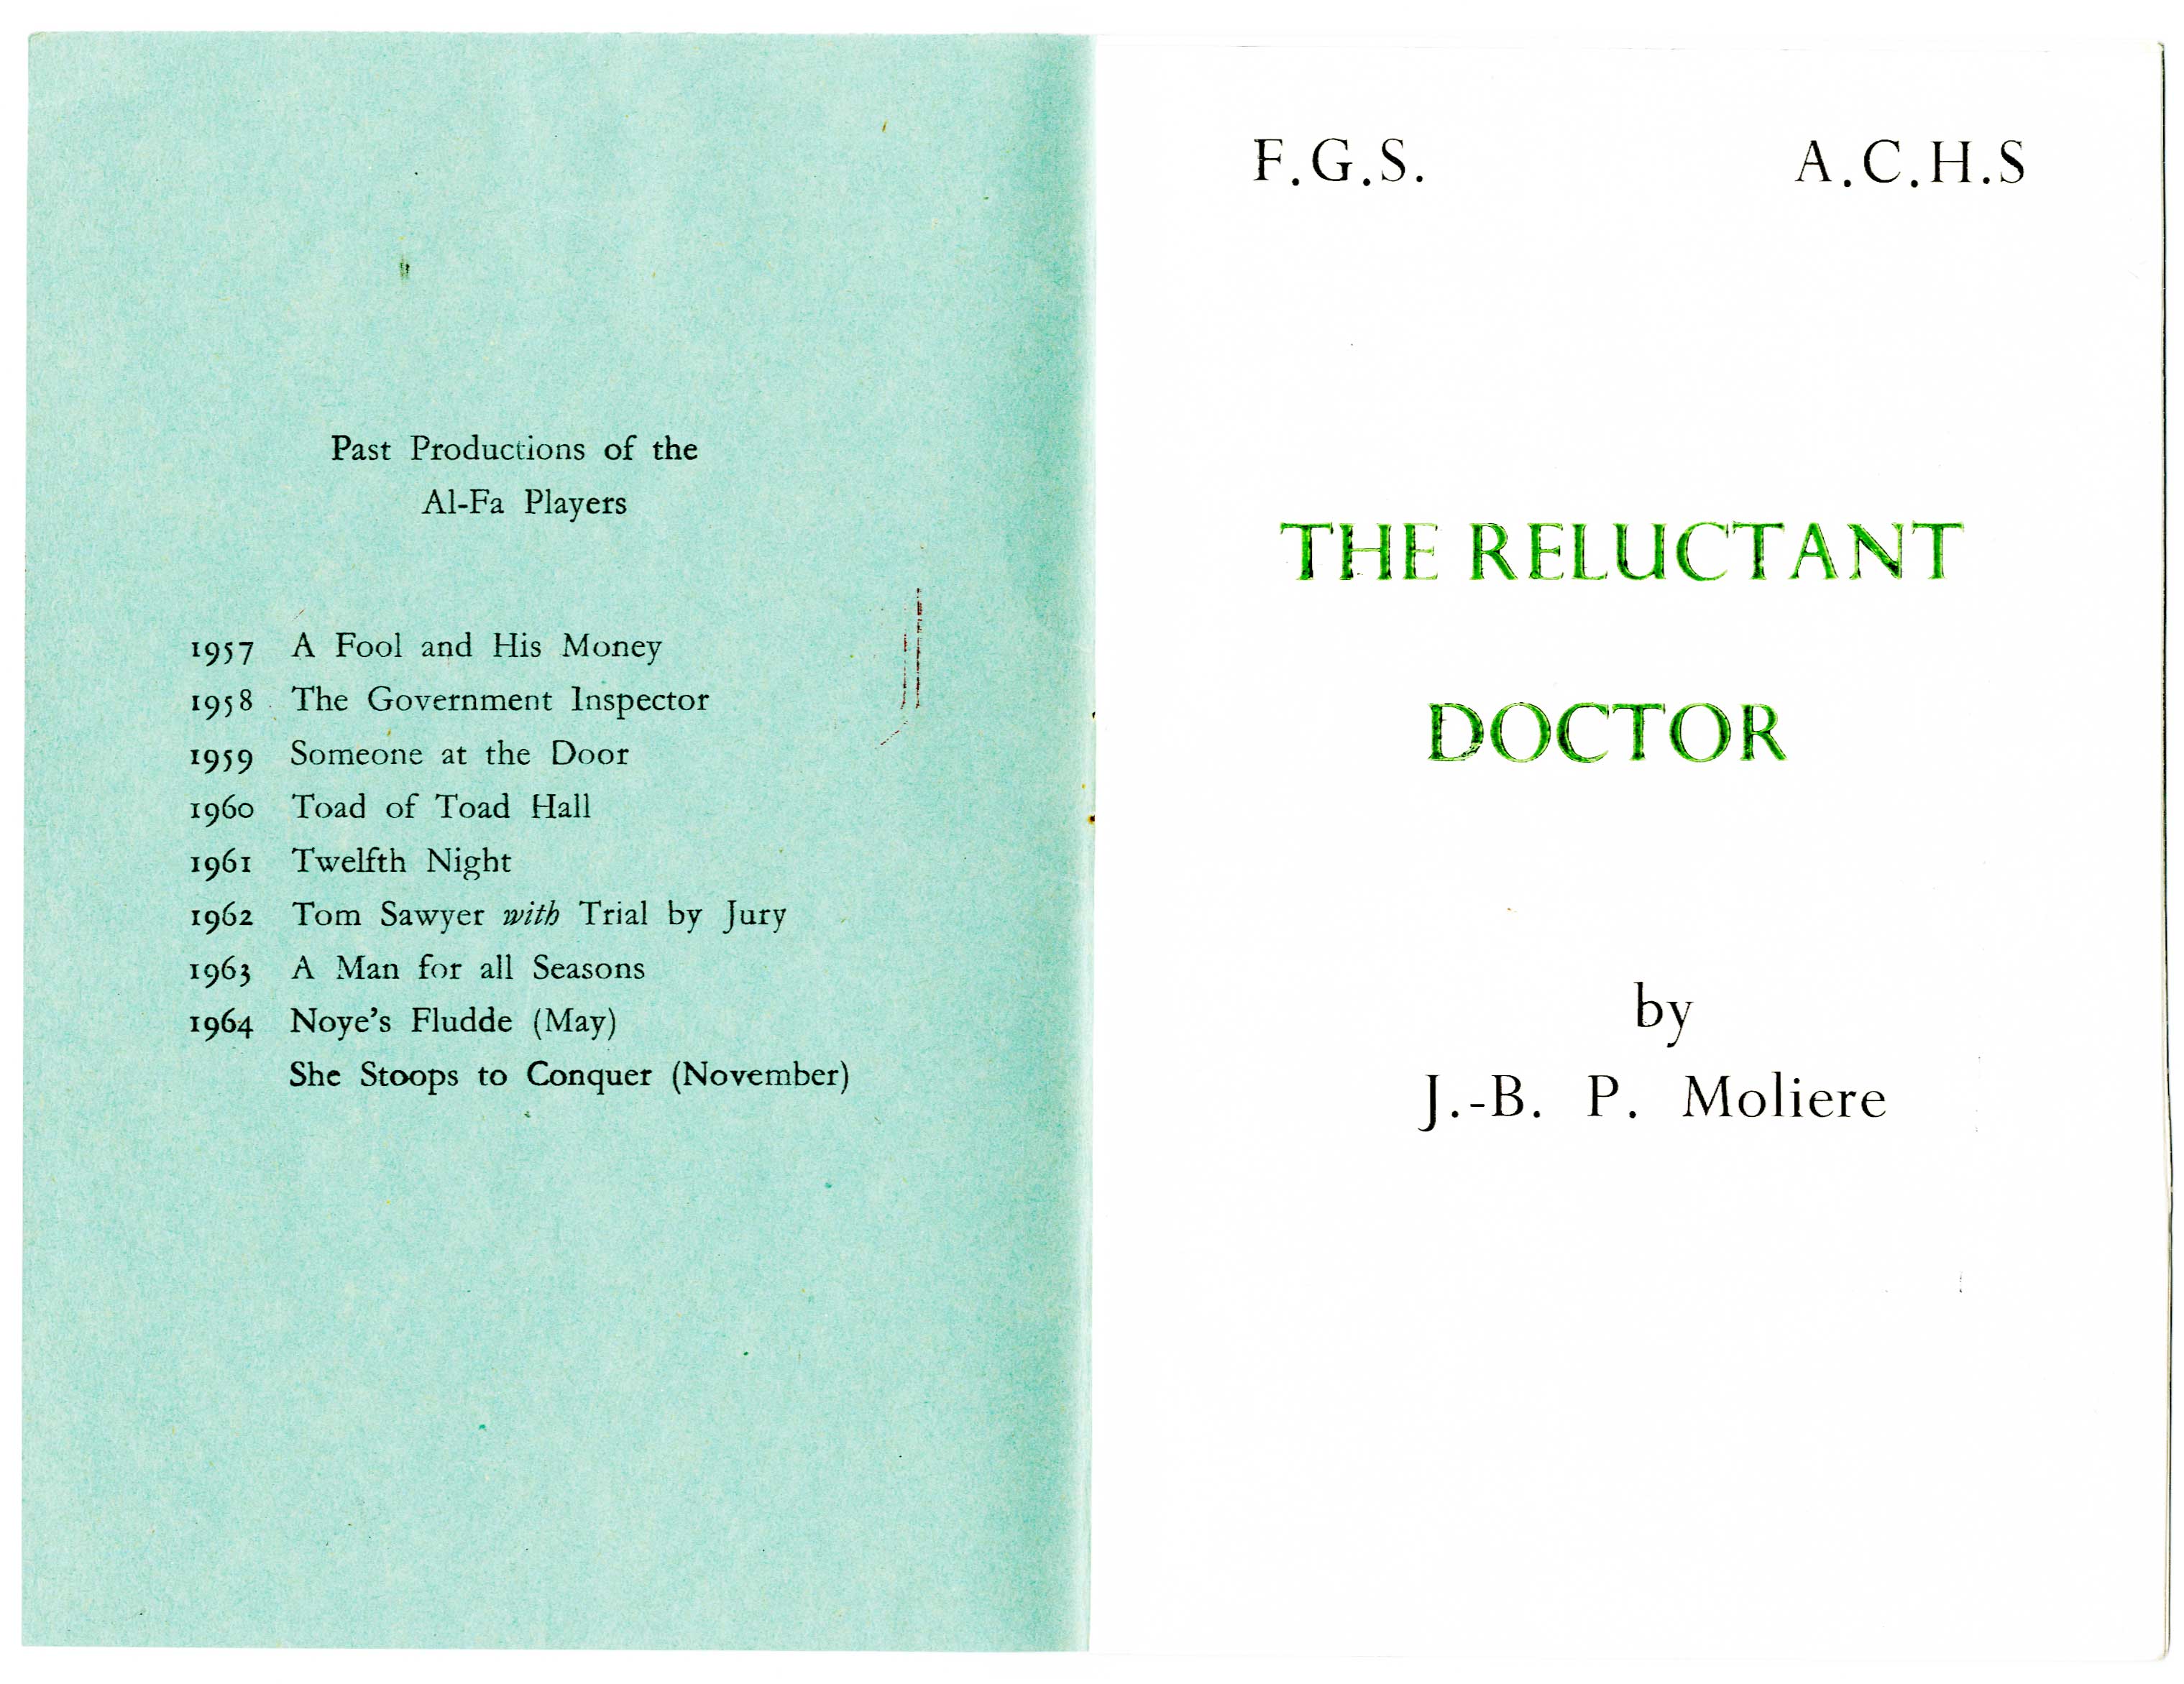 Reluctant Doctor inside front cover